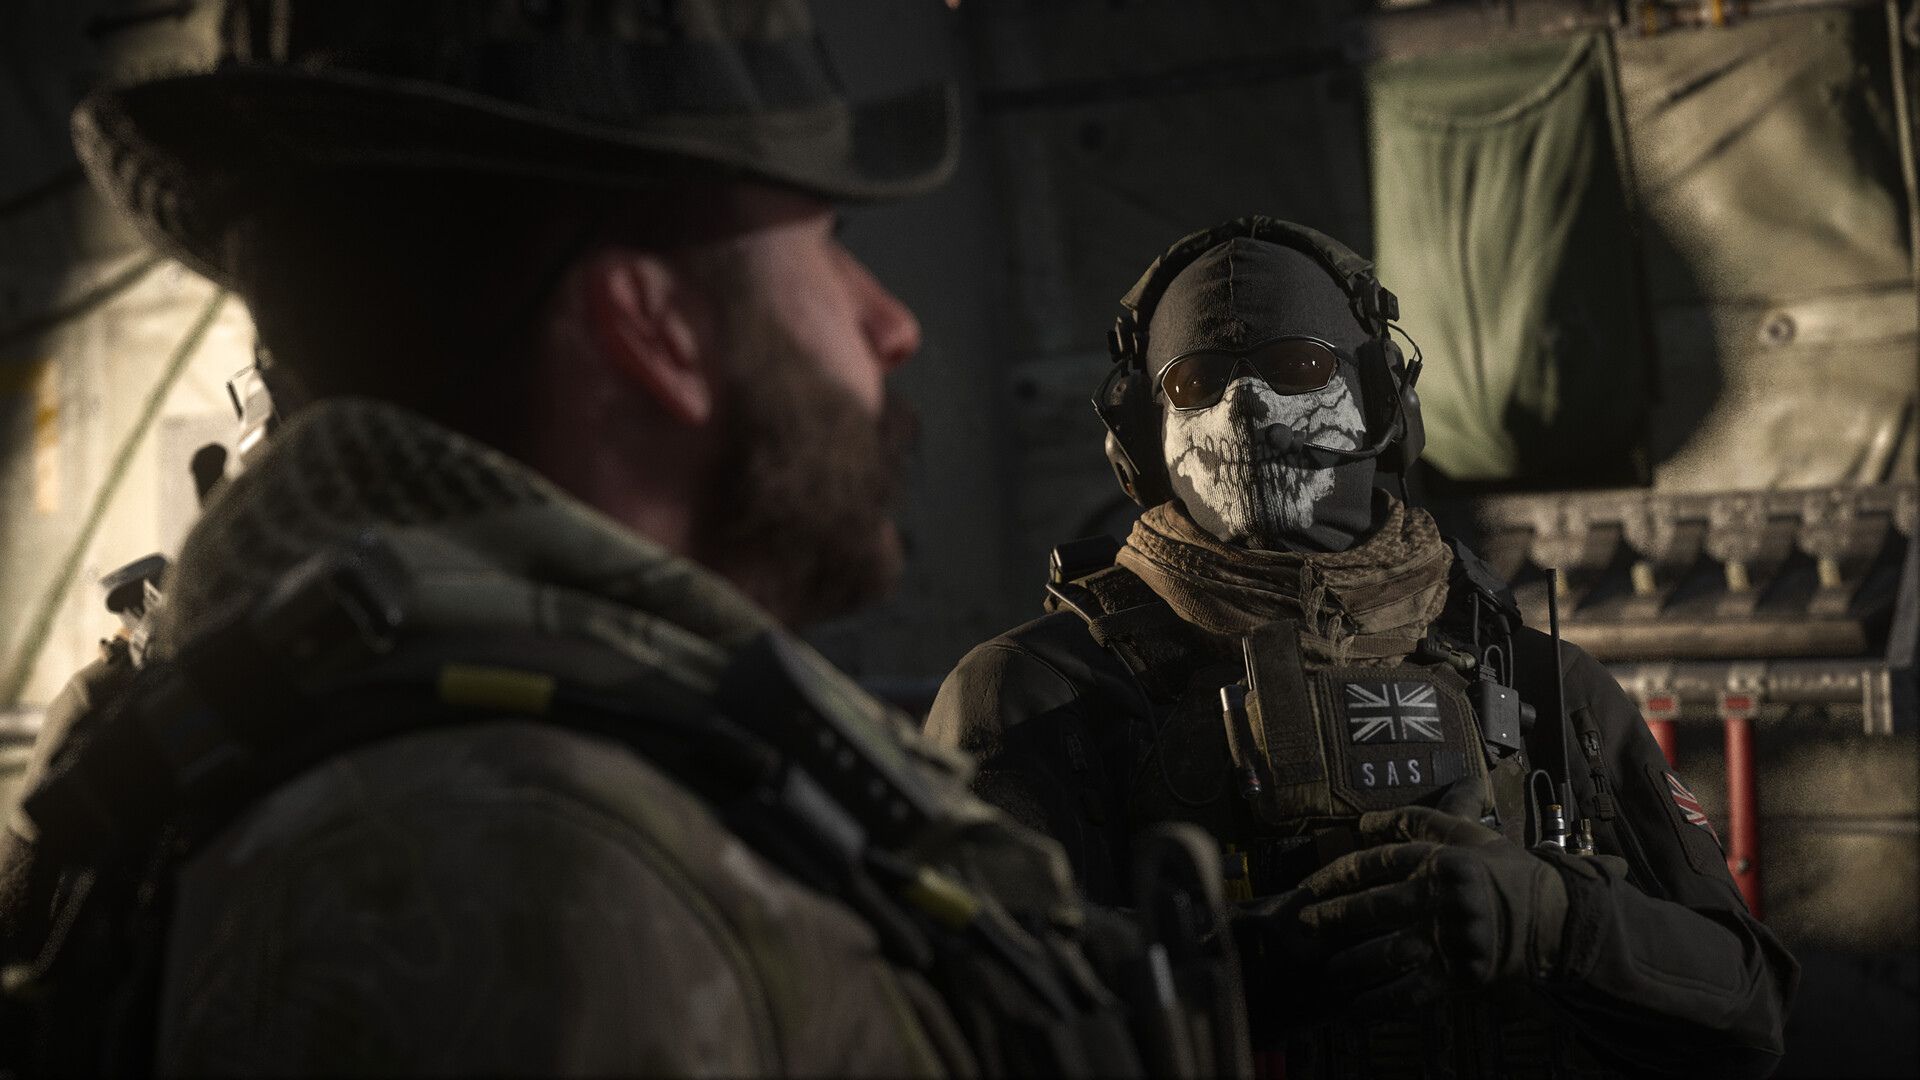 Call of Duty: 2022 Insider Teases DLC, Includes Call of Duty 4, MW2, and,  MW3 Maps